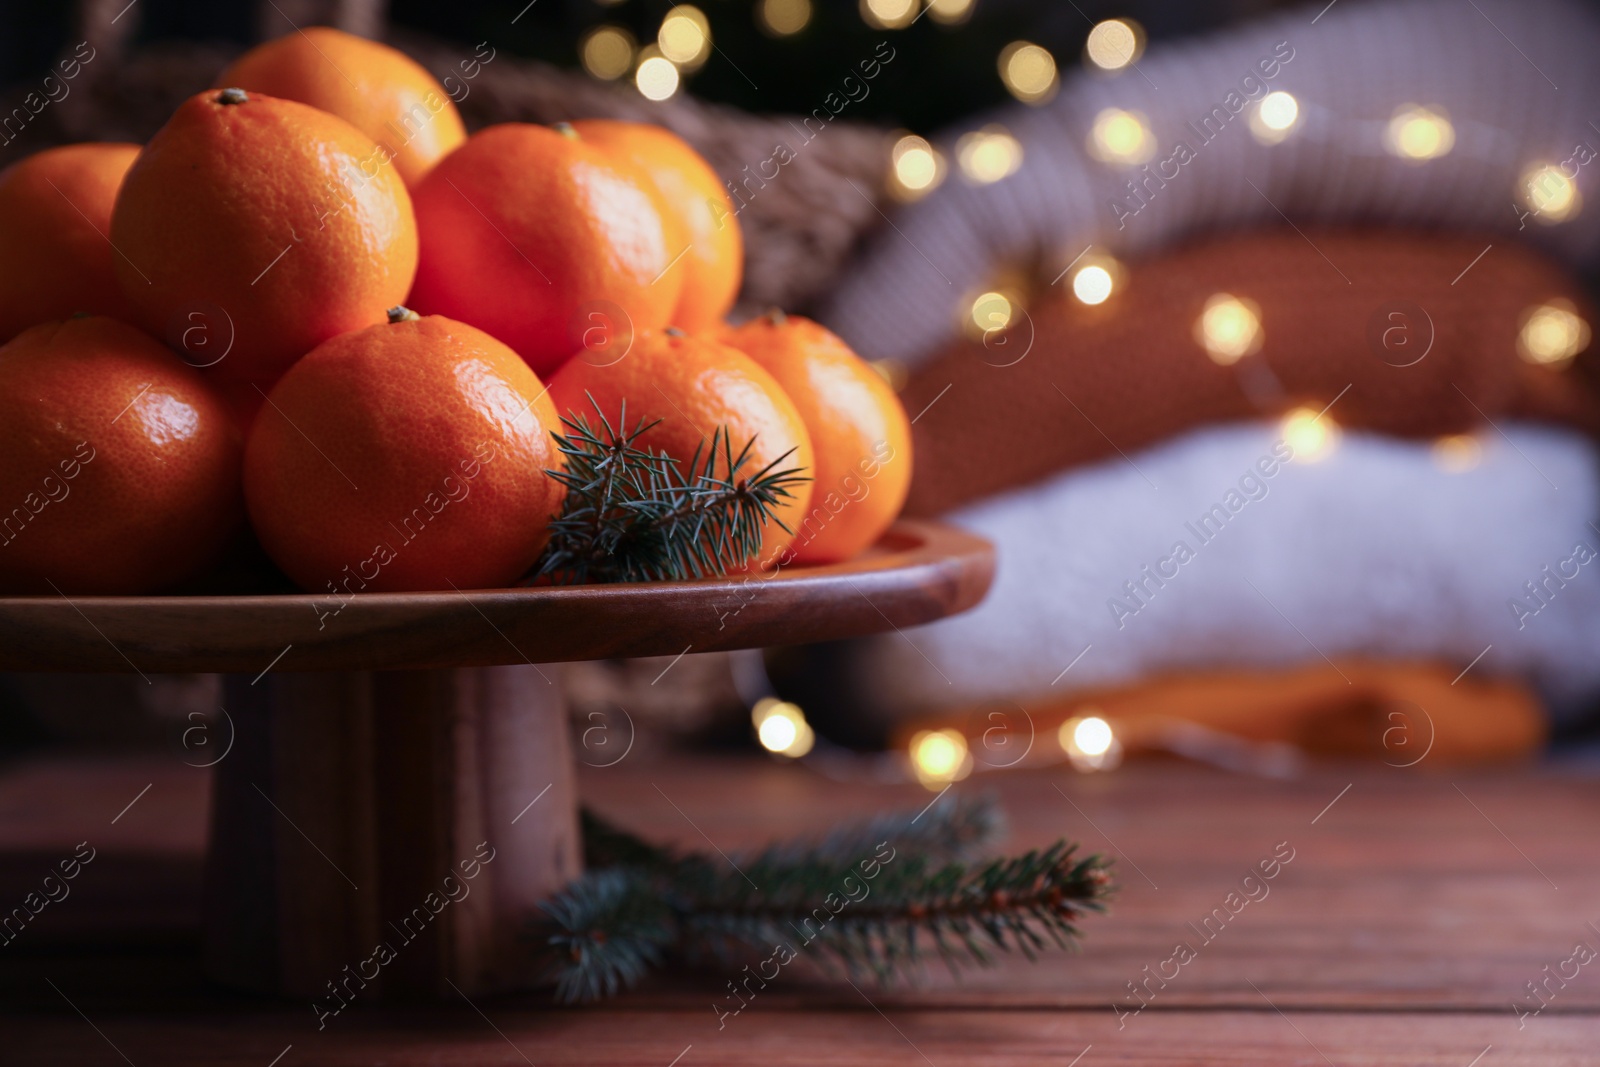 Photo of Stand with delicious ripe tangerines and fir twigs on wooden table. Space for text